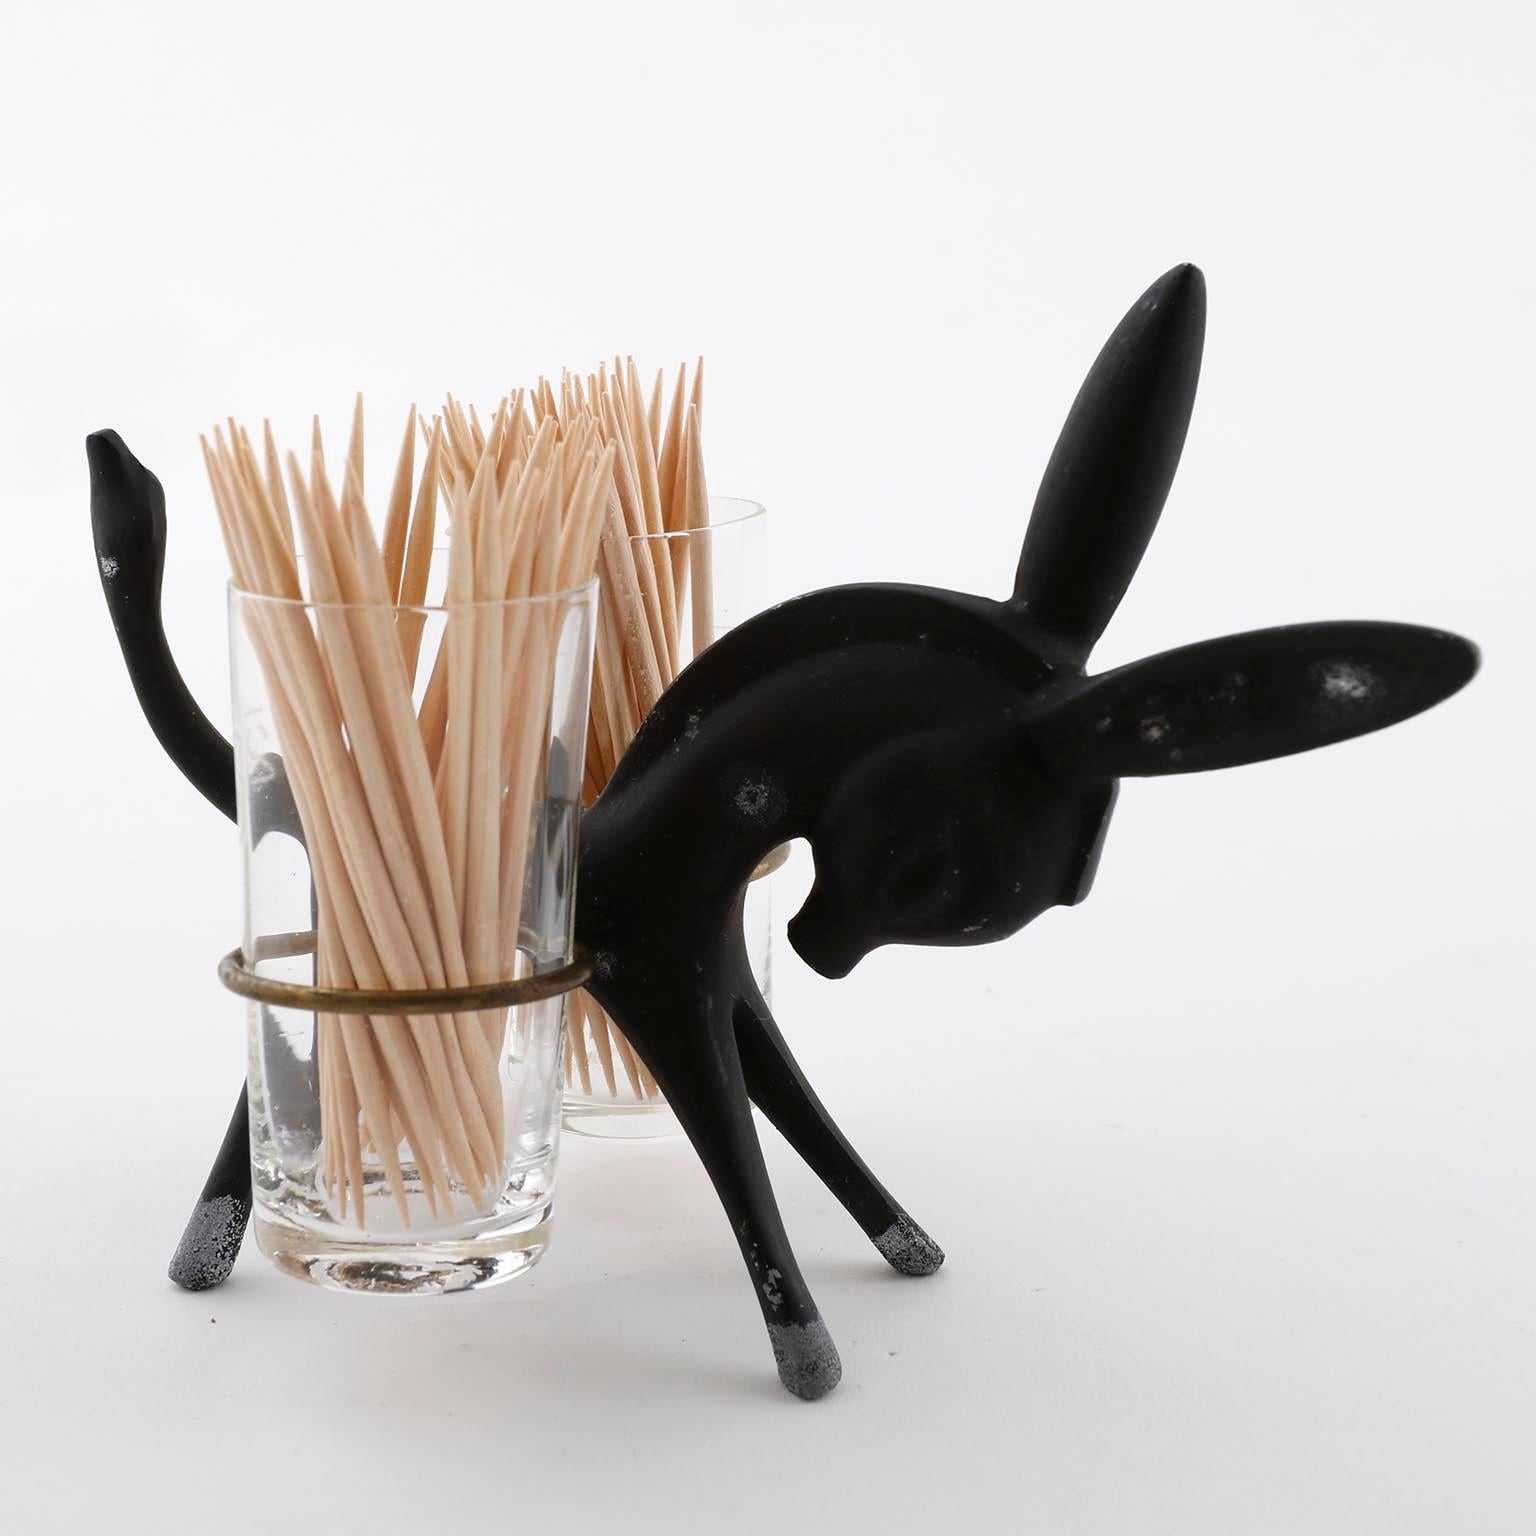 A toothpick holder set in the form of a donkey designed by Walter Bosse and manufactured by Hertha Baller, Austria, Vienna, in midcentury in 1950s.
The donkey is made of patinated and aged blackened brass. The toothpick holders are made of